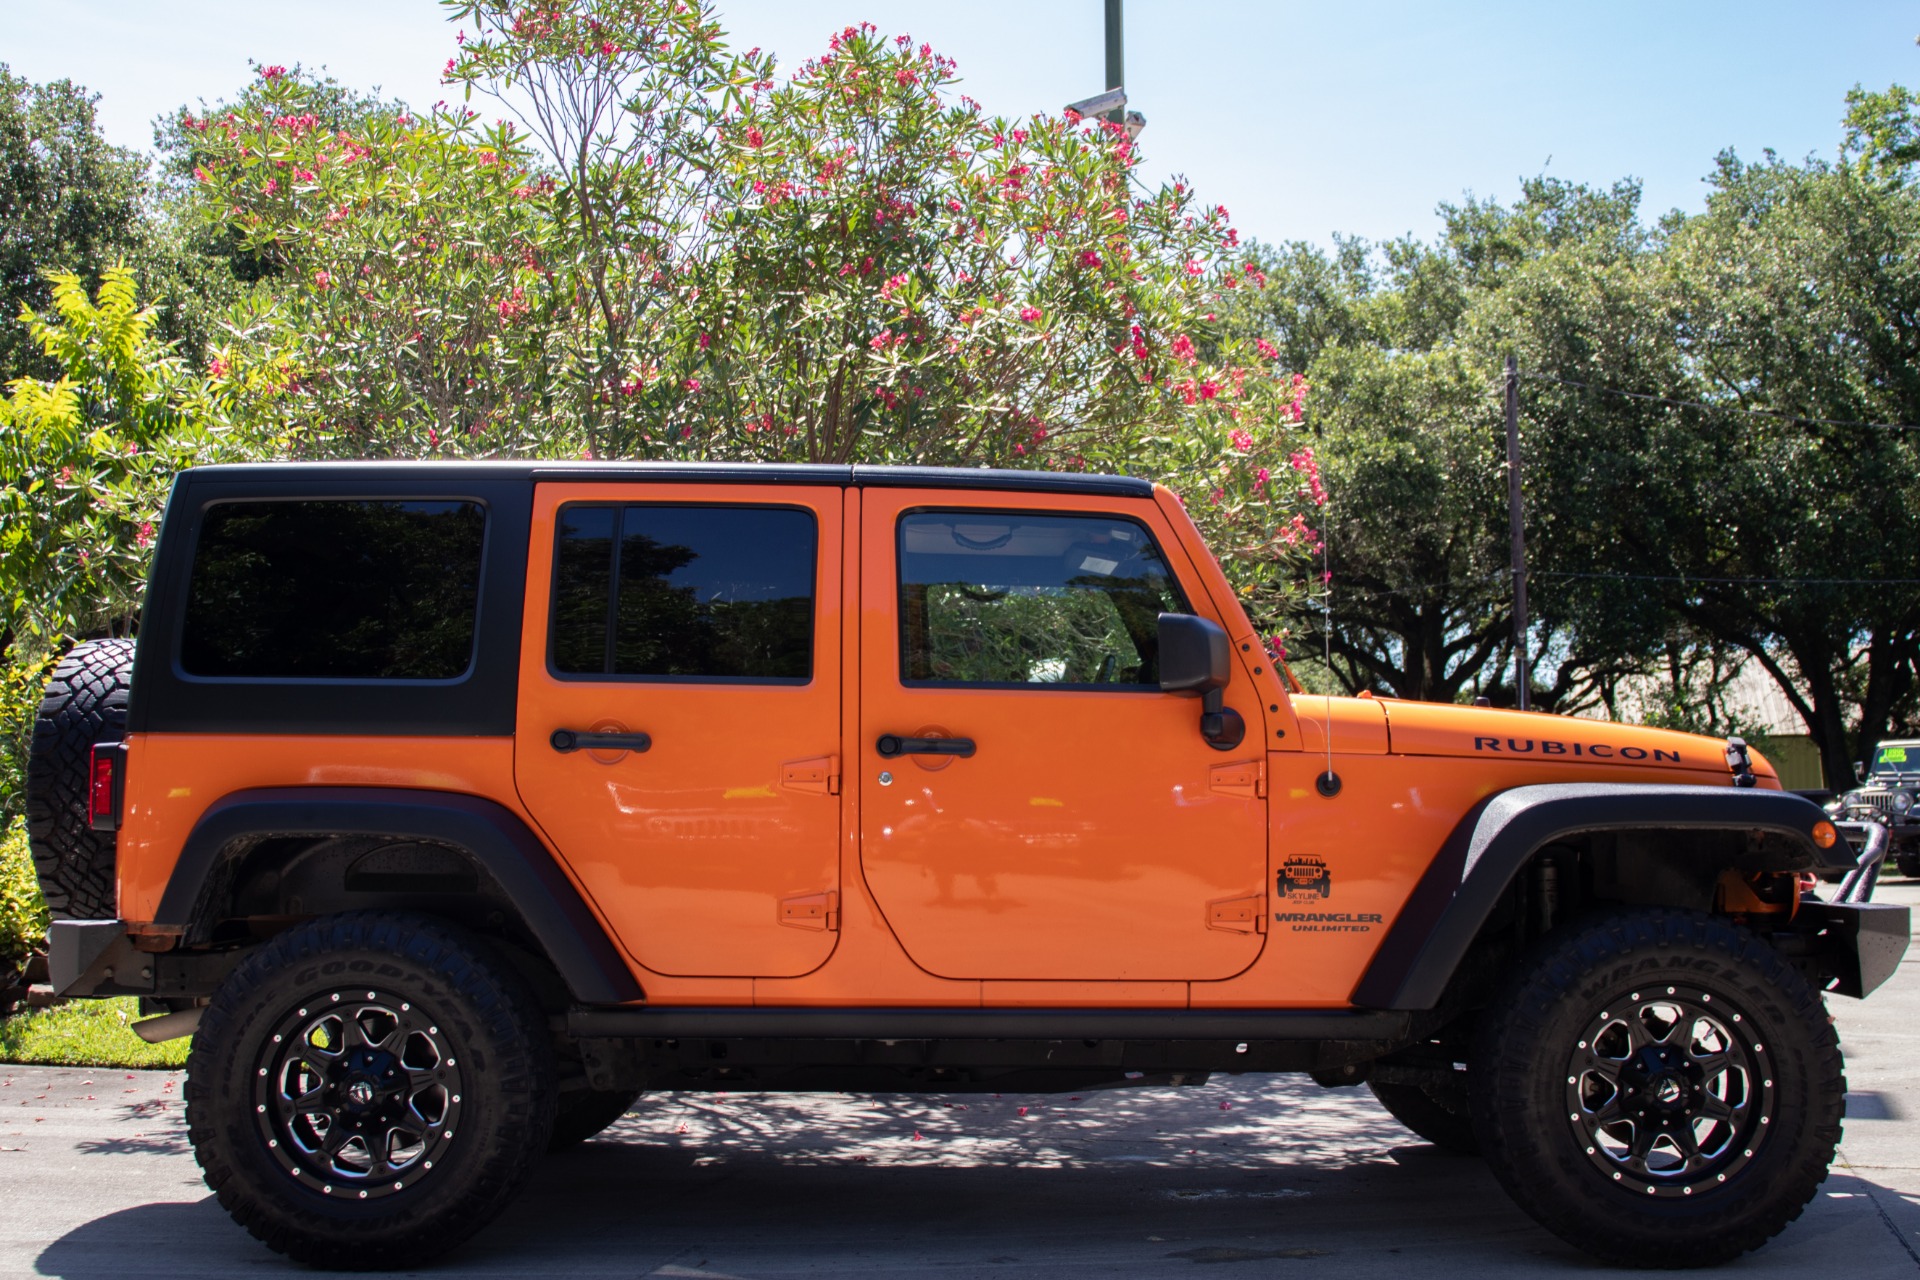 Used 2012 Jeep Wrangler Unlimited Rubicon For Sale 27 995 Select 